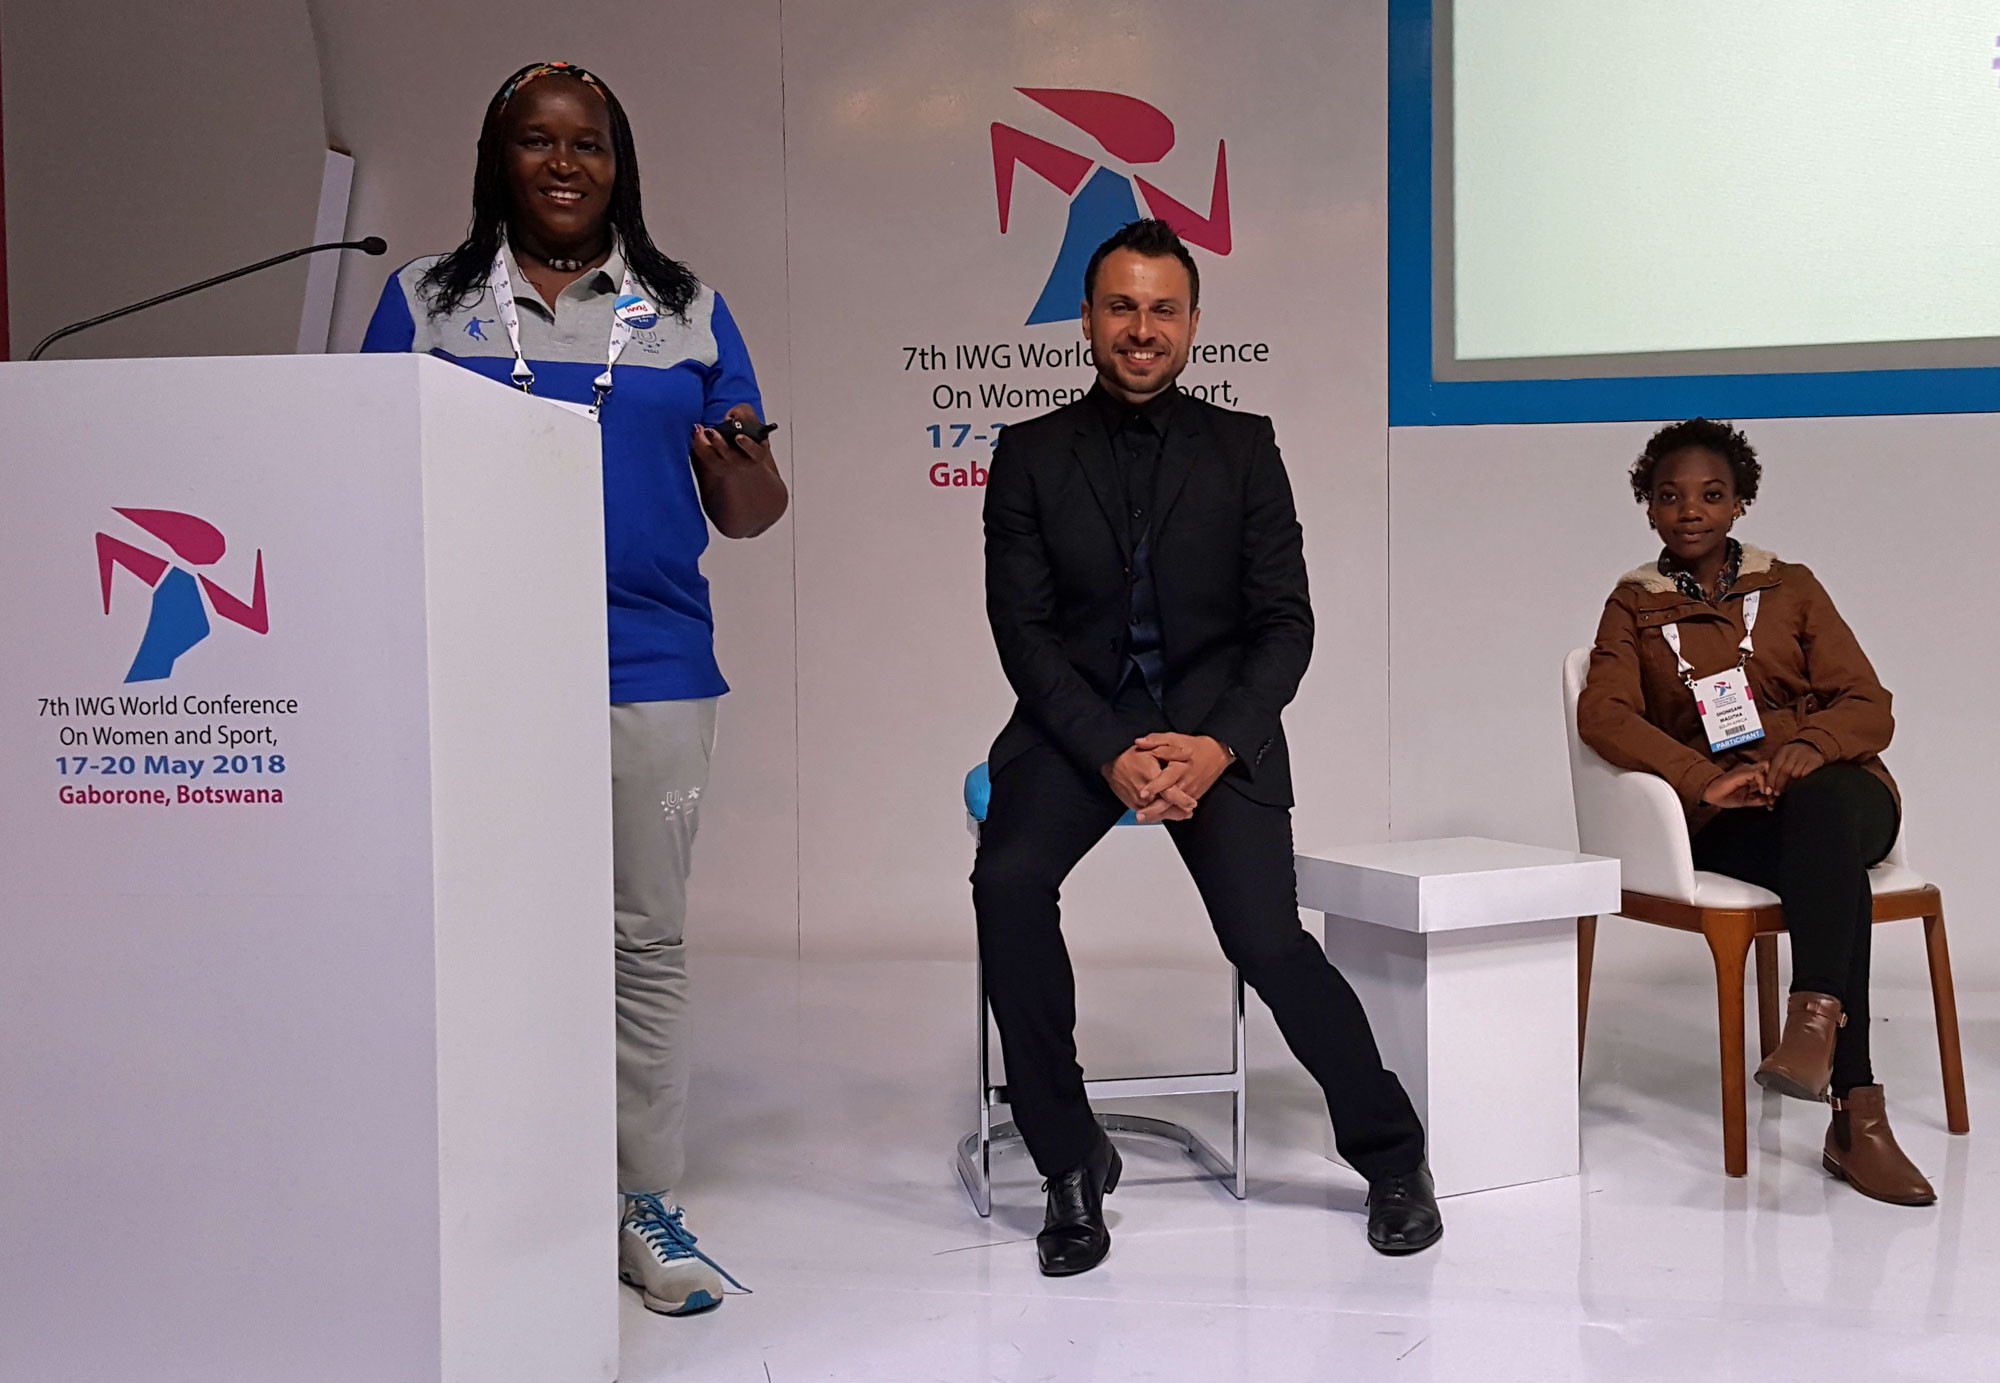 International University Sports Federation members were among those in attendance at the seventh edition of the World Conference on Women and Sport in Gaborone ©FISU